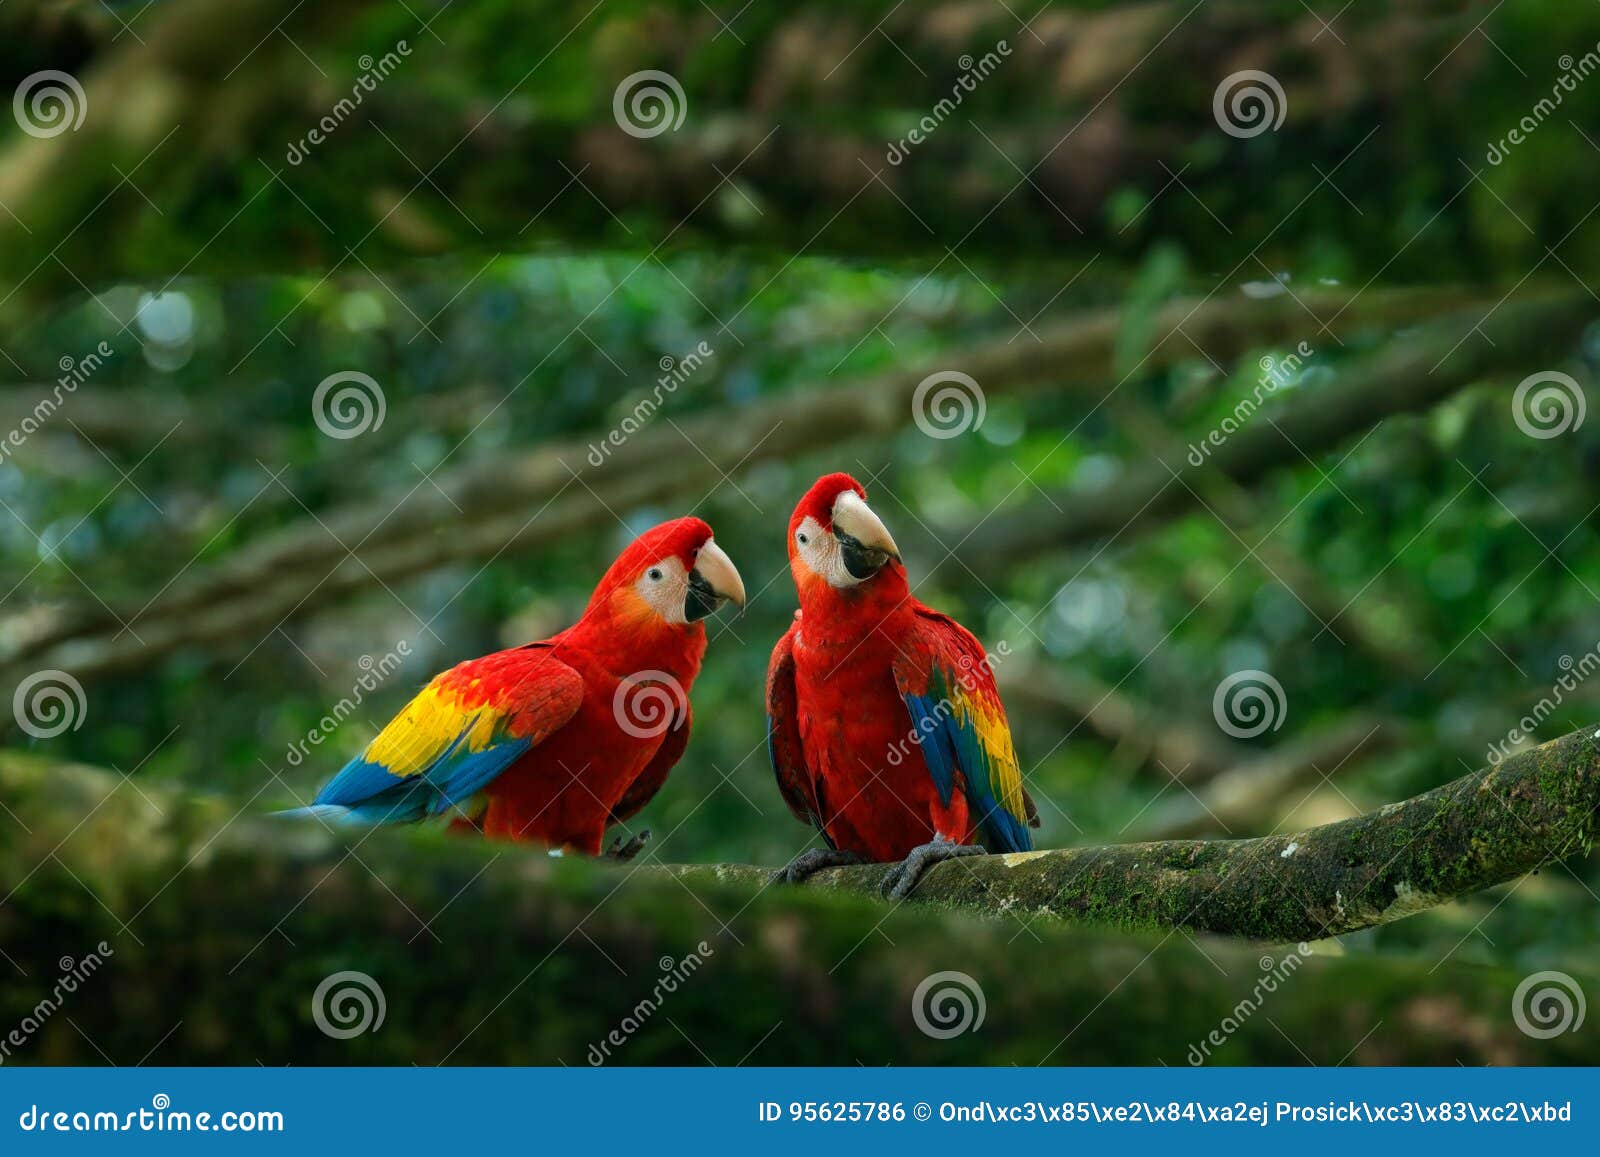 pair of big parrot scarlet macaw, ara macao, two birds sitting on branch, brazil. wildlife love scene from tropic forest nature. t